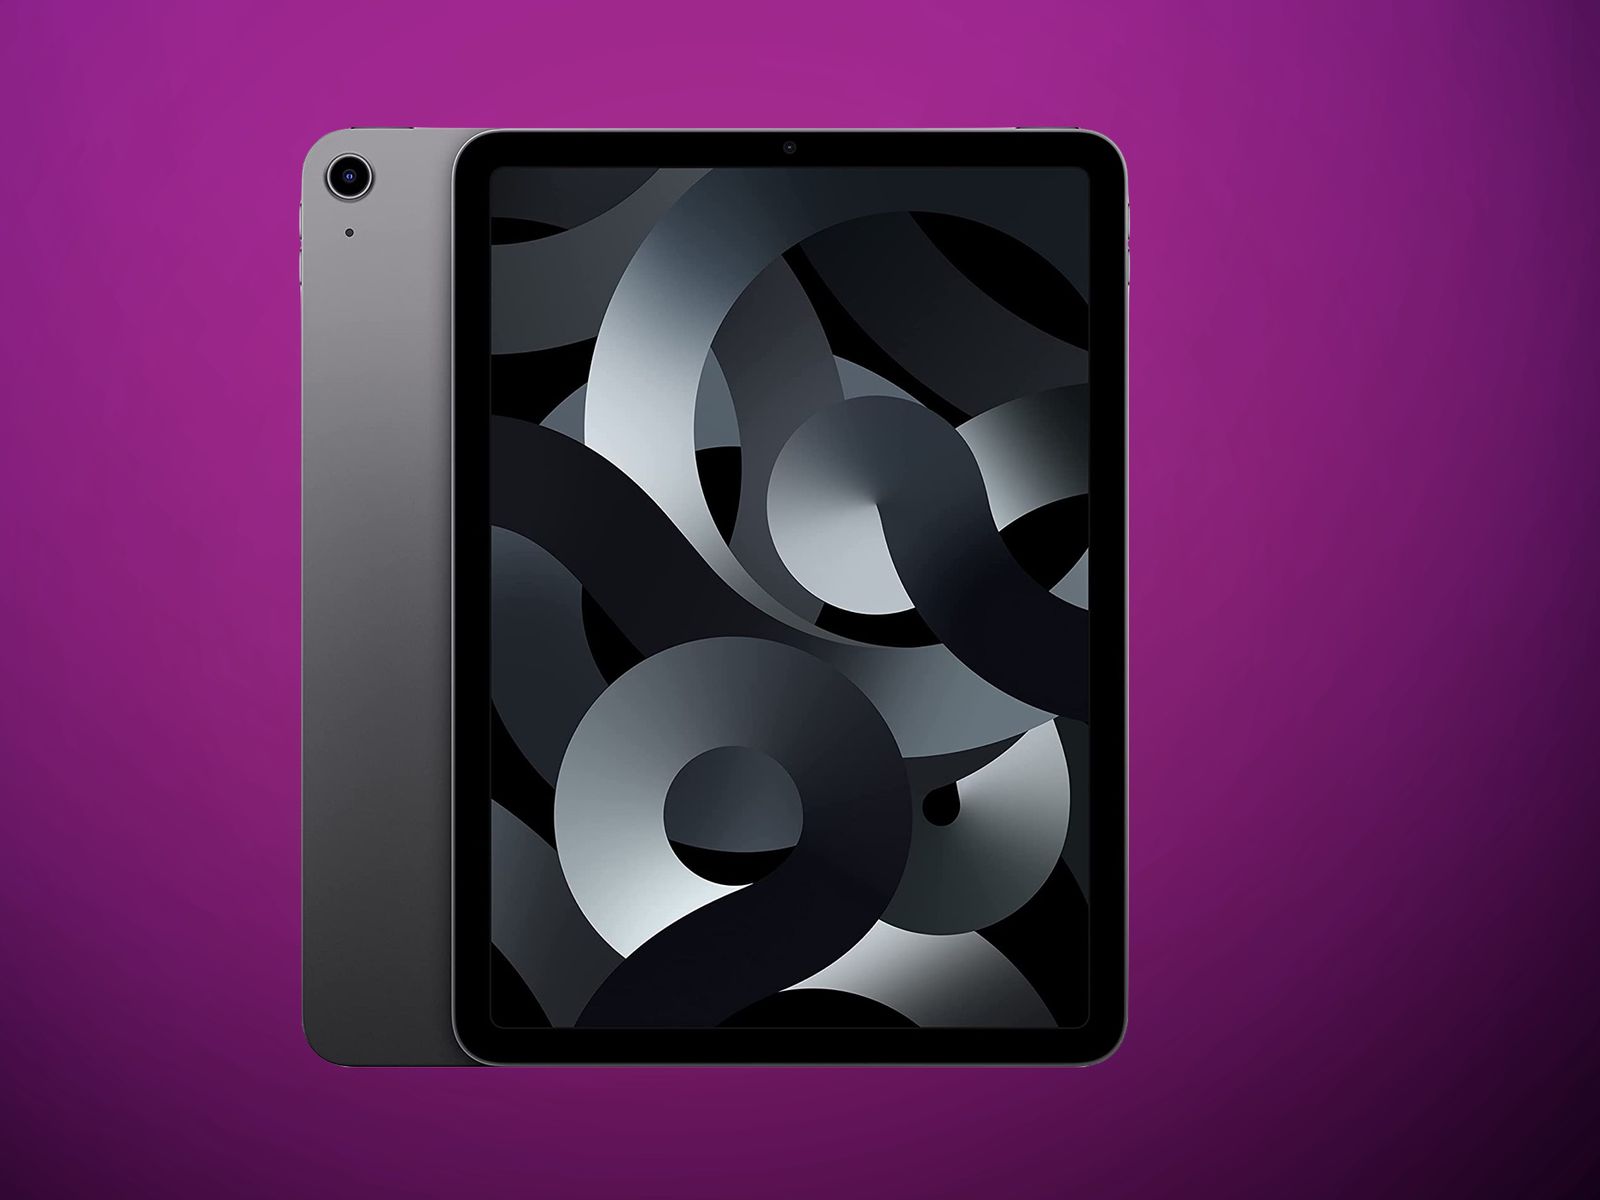 Apple iPad rumors: could the iPad Air get a bigger model? We'll find out in  March